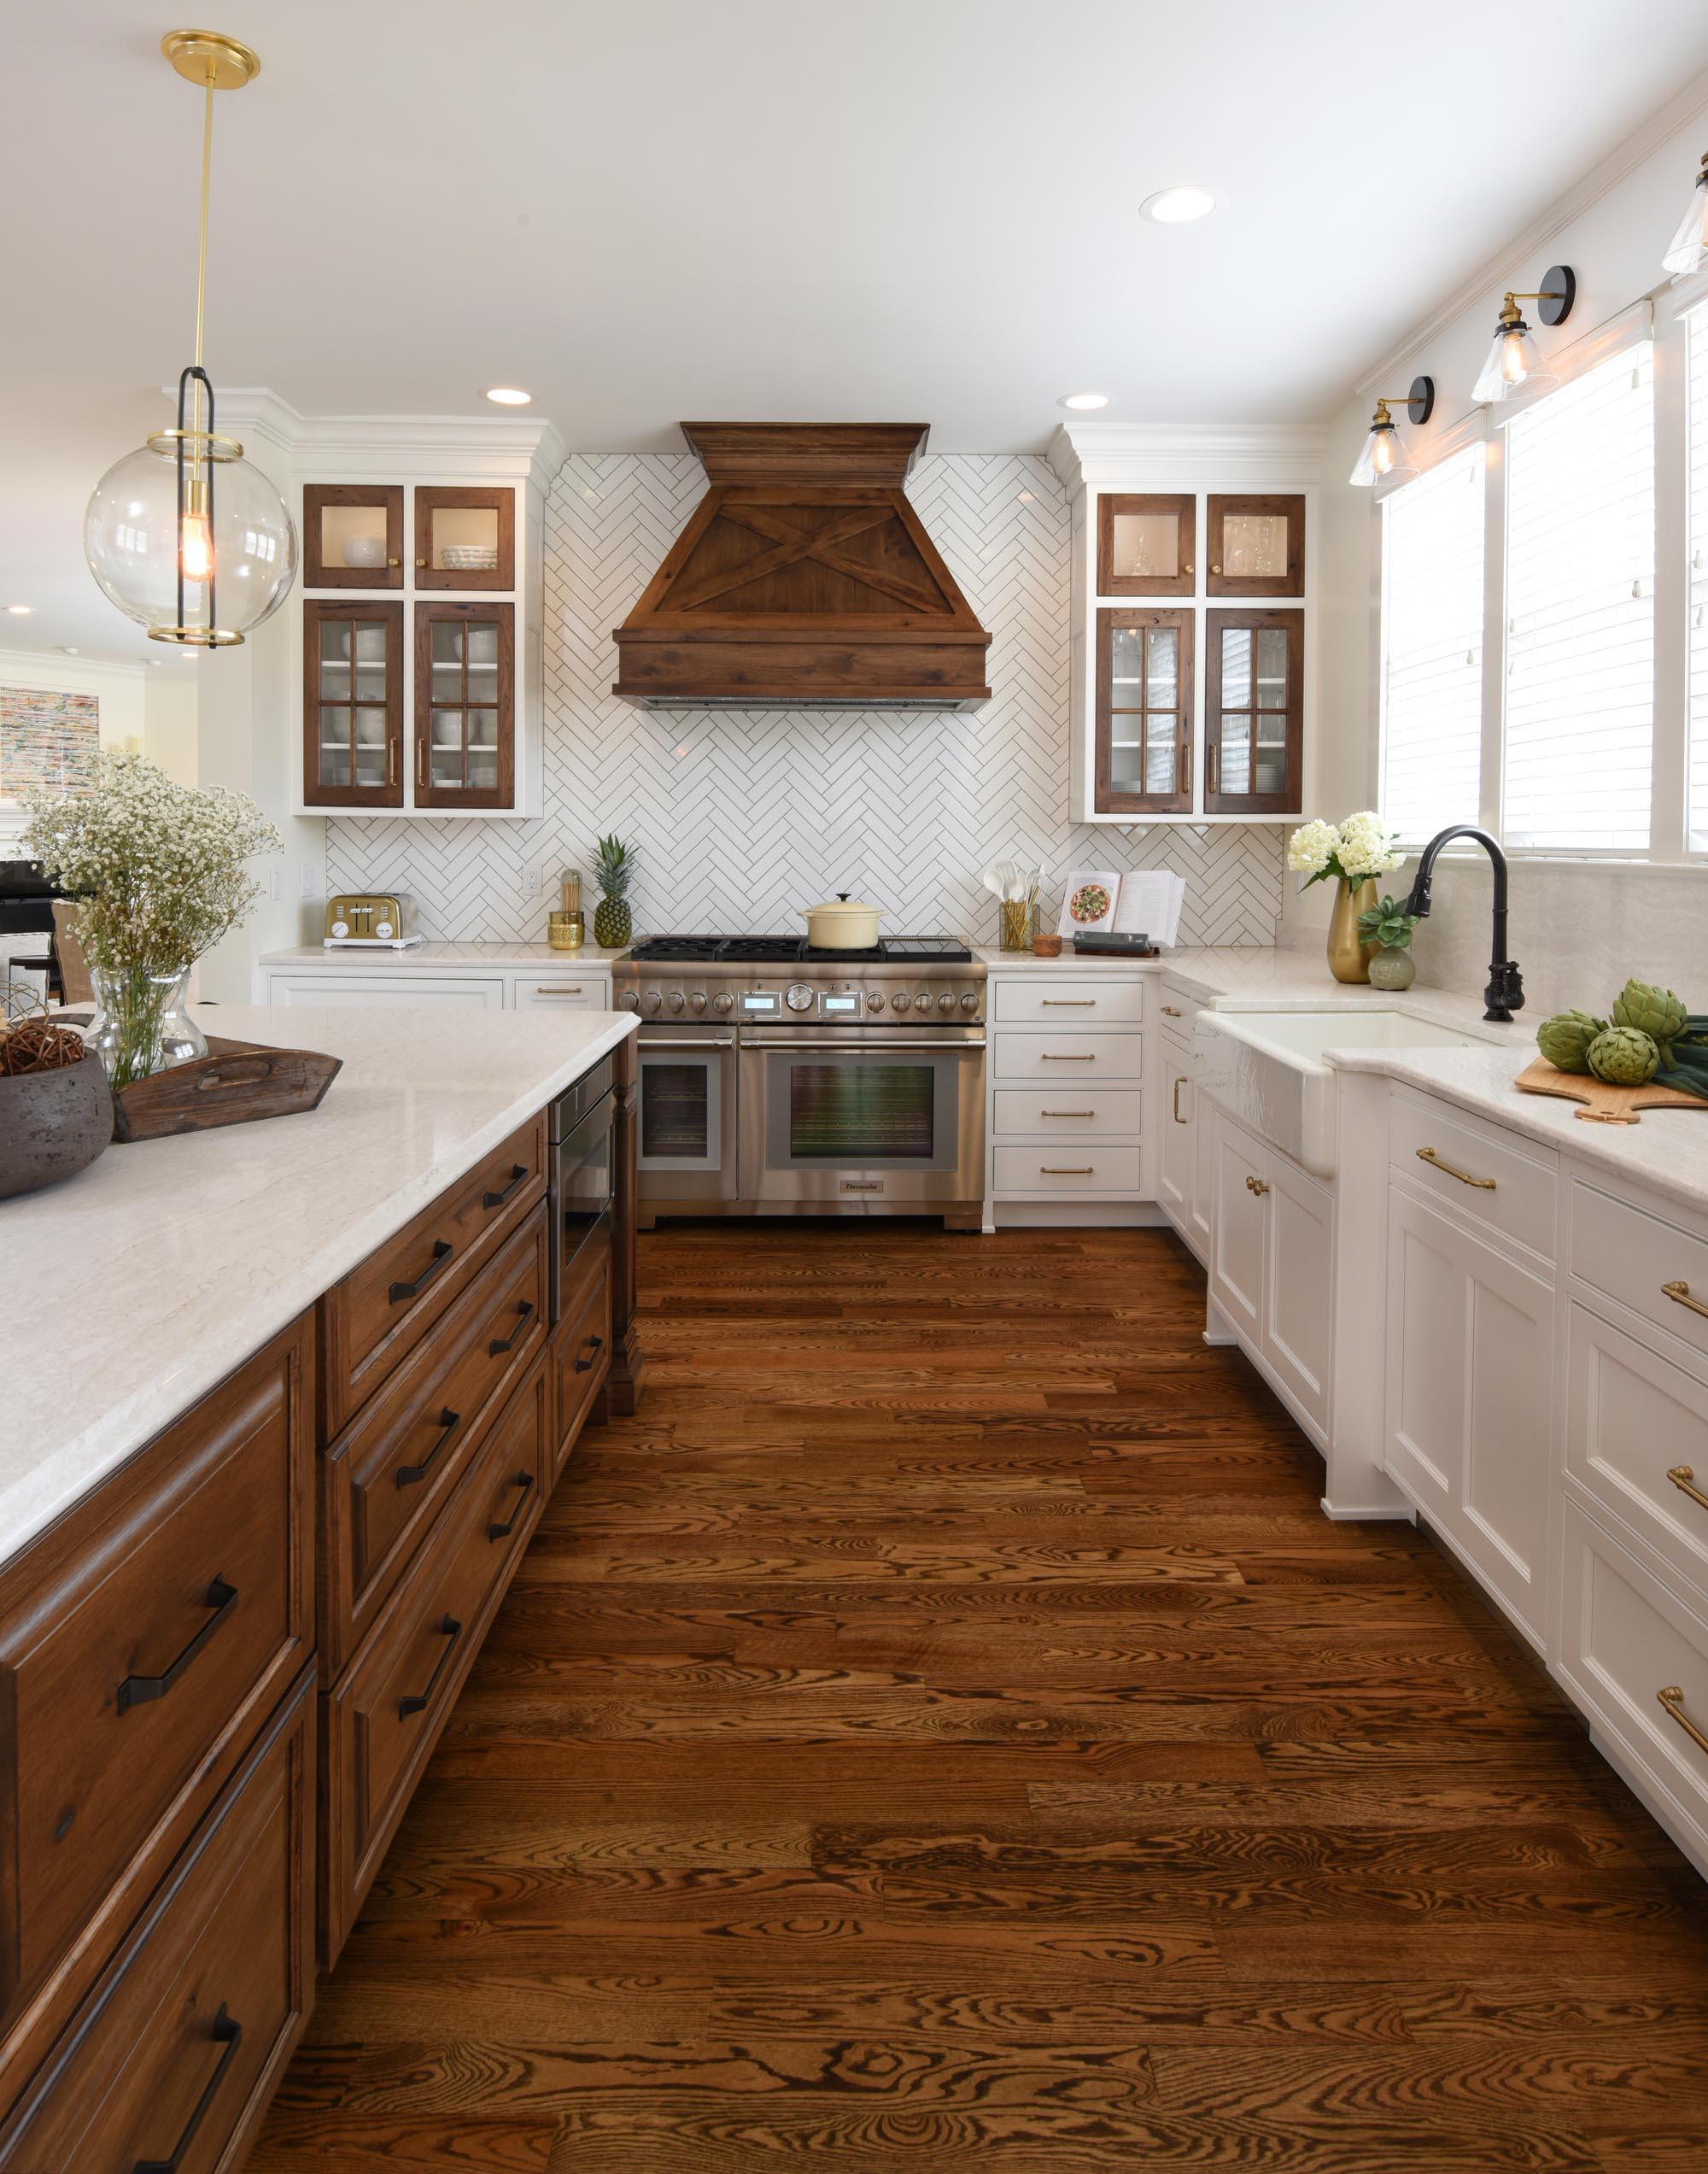 Transformative Home Remodeling: Redefining Your Living Spaces